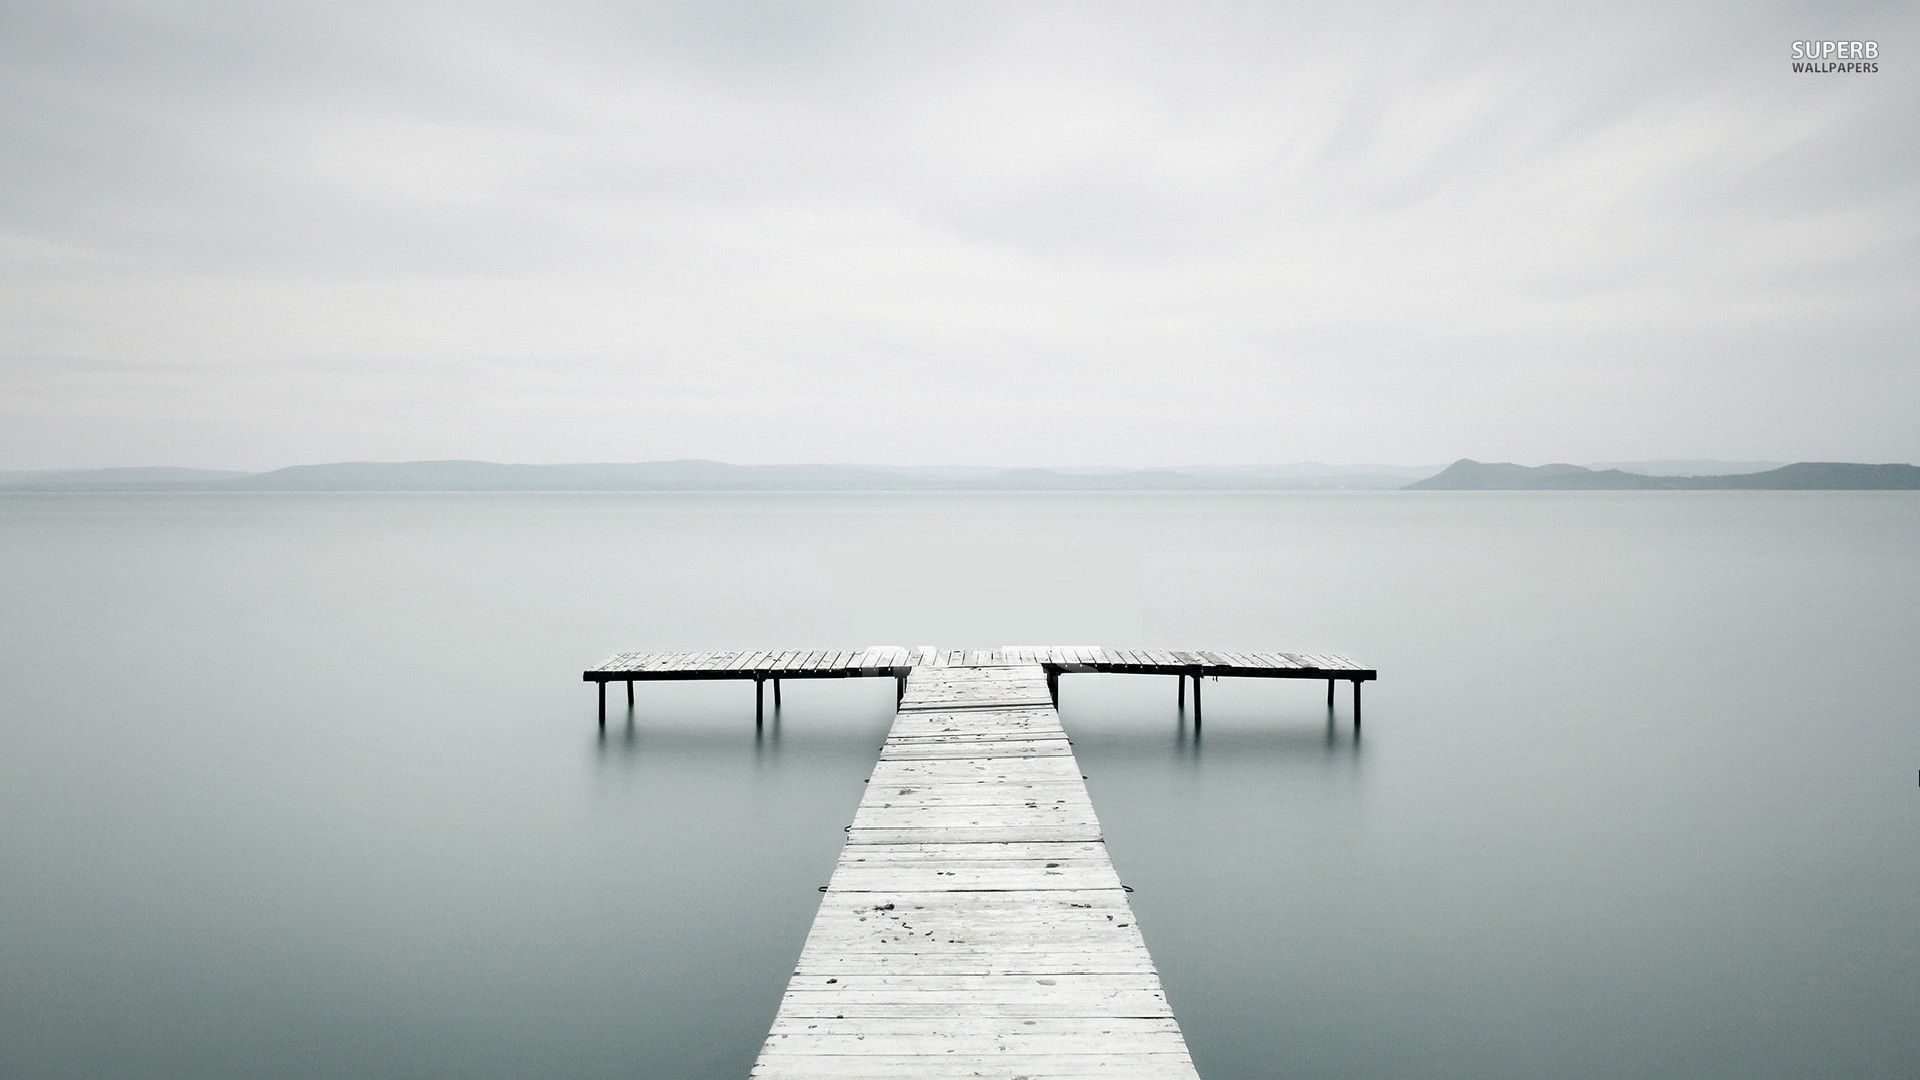 Dock on a misty lake wallpaper - Nature wallpapers - #26456